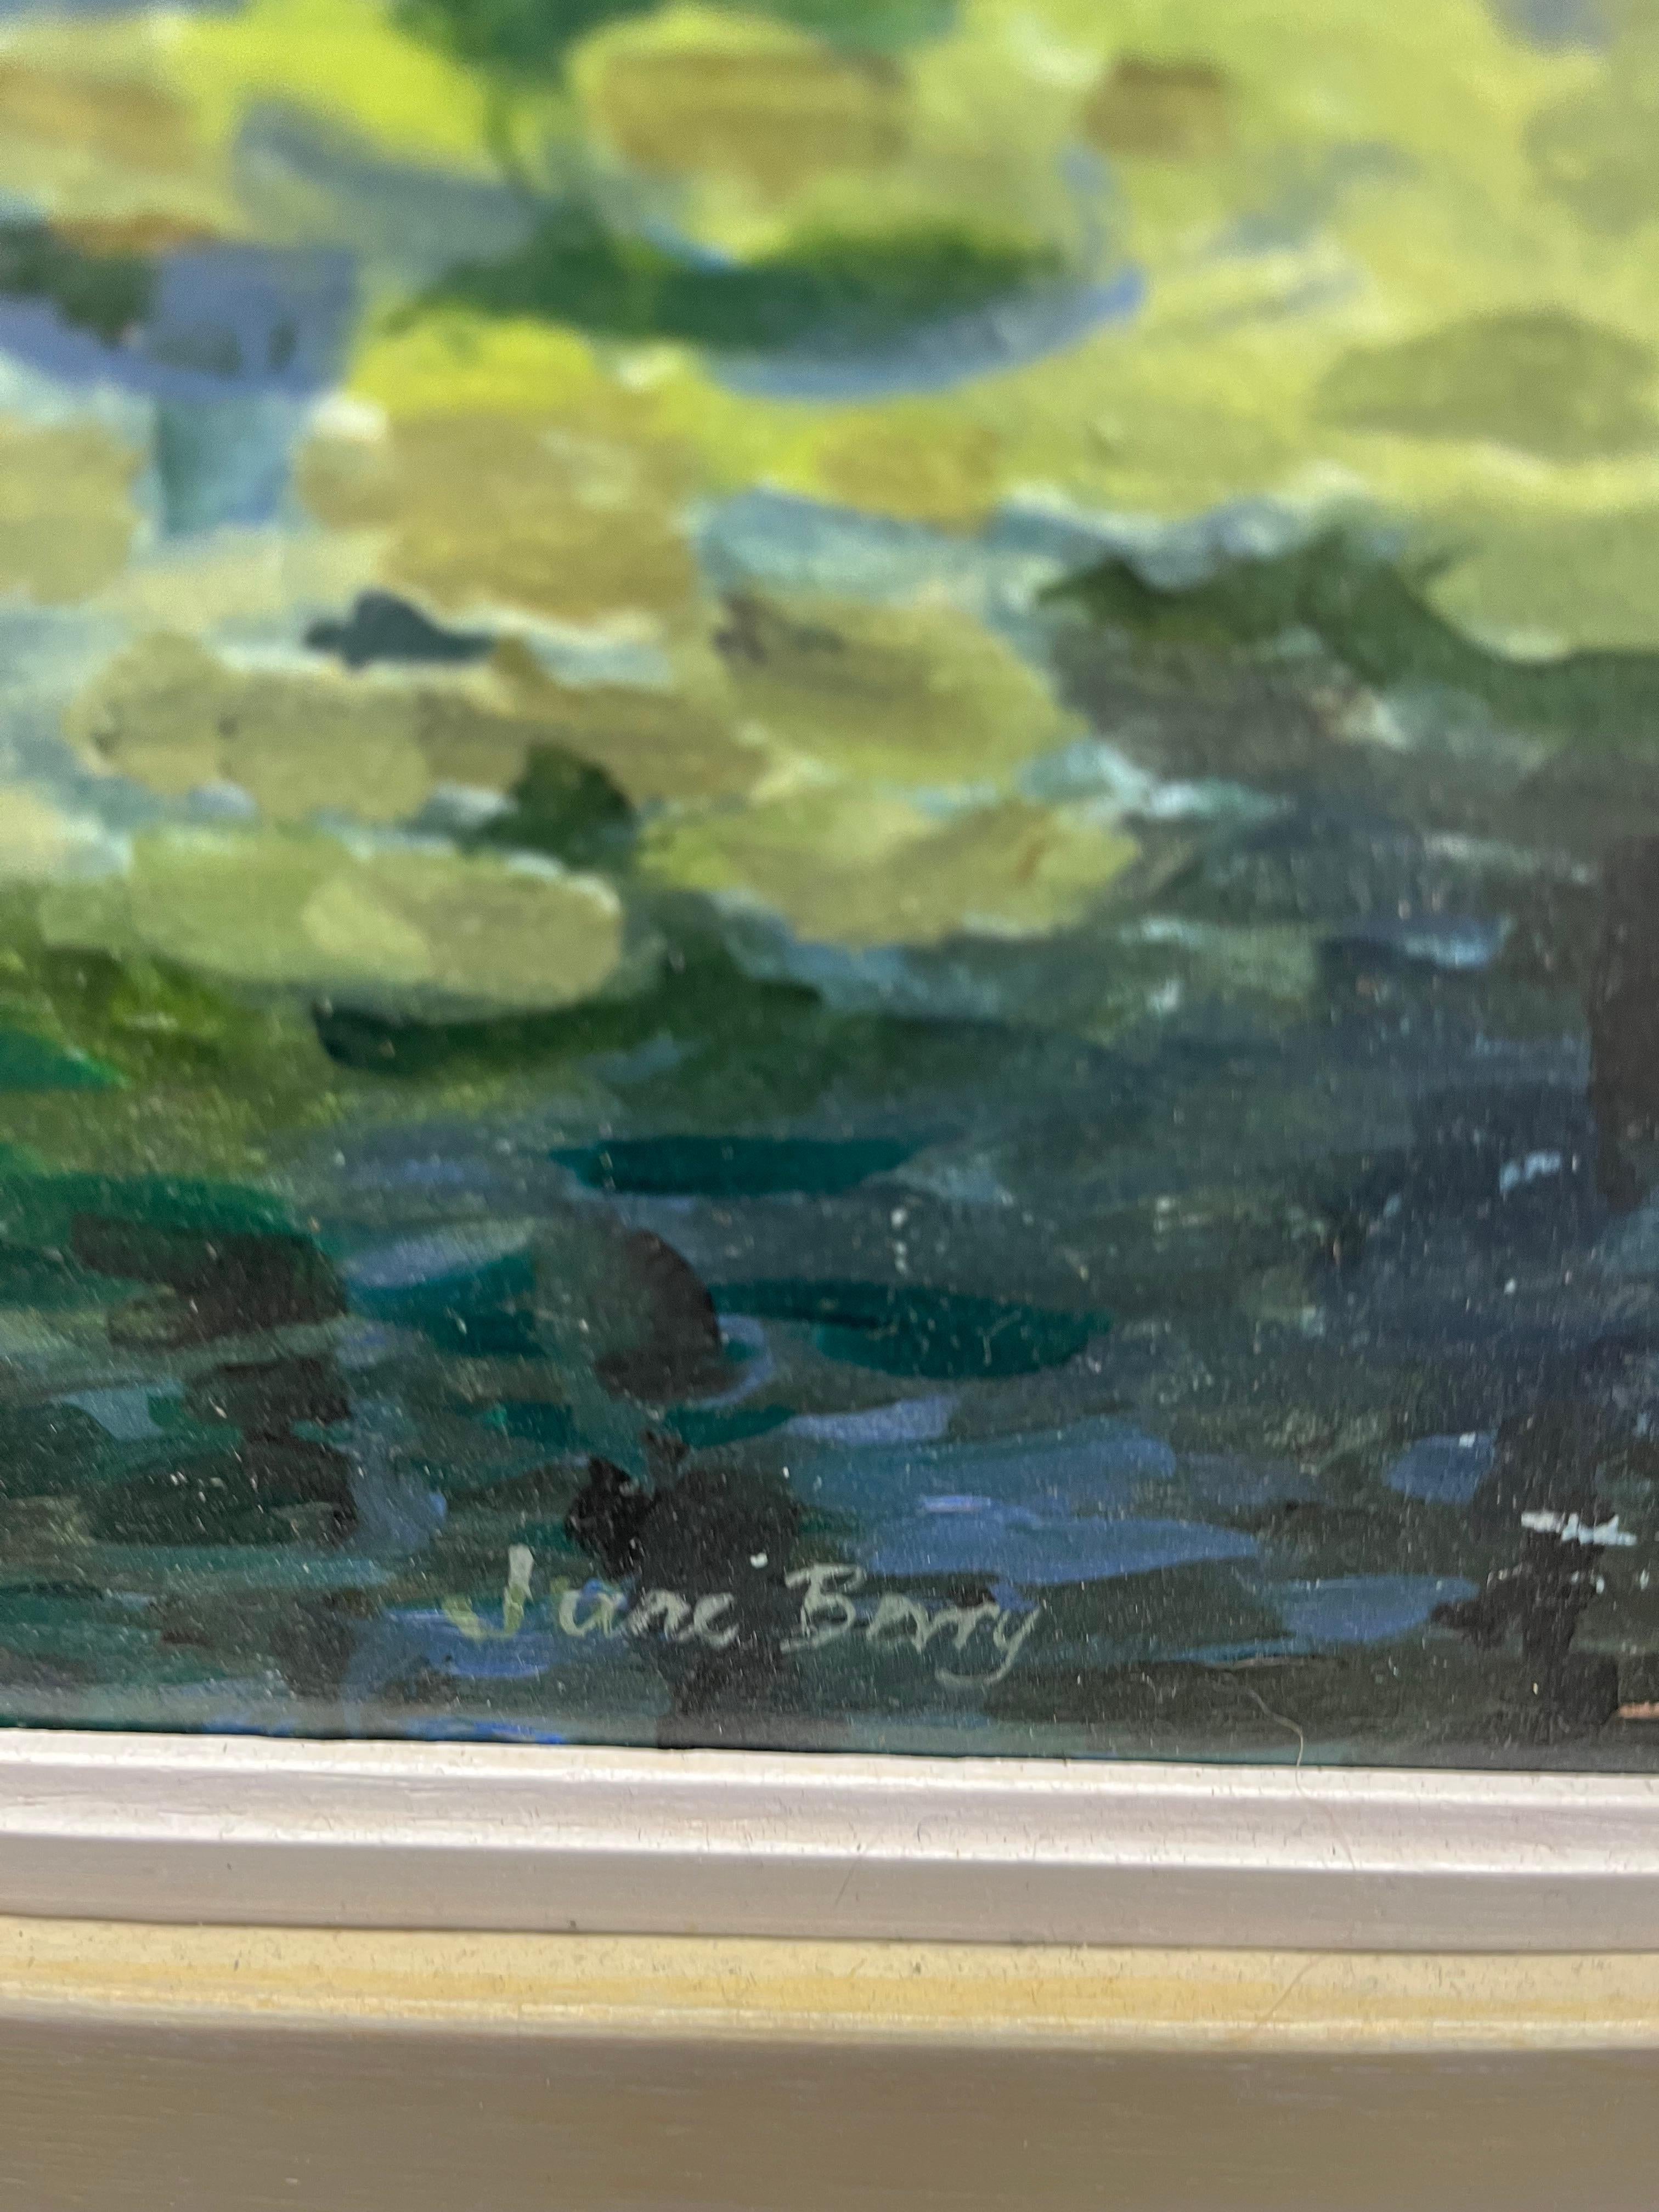 June Berry's art is about life, the life of real people, and it is basically optimistic and joyful, even when contemplative. 

​

Life transformed into art: an art based on observation of the particular, but so steeped in tone that it moves beyond